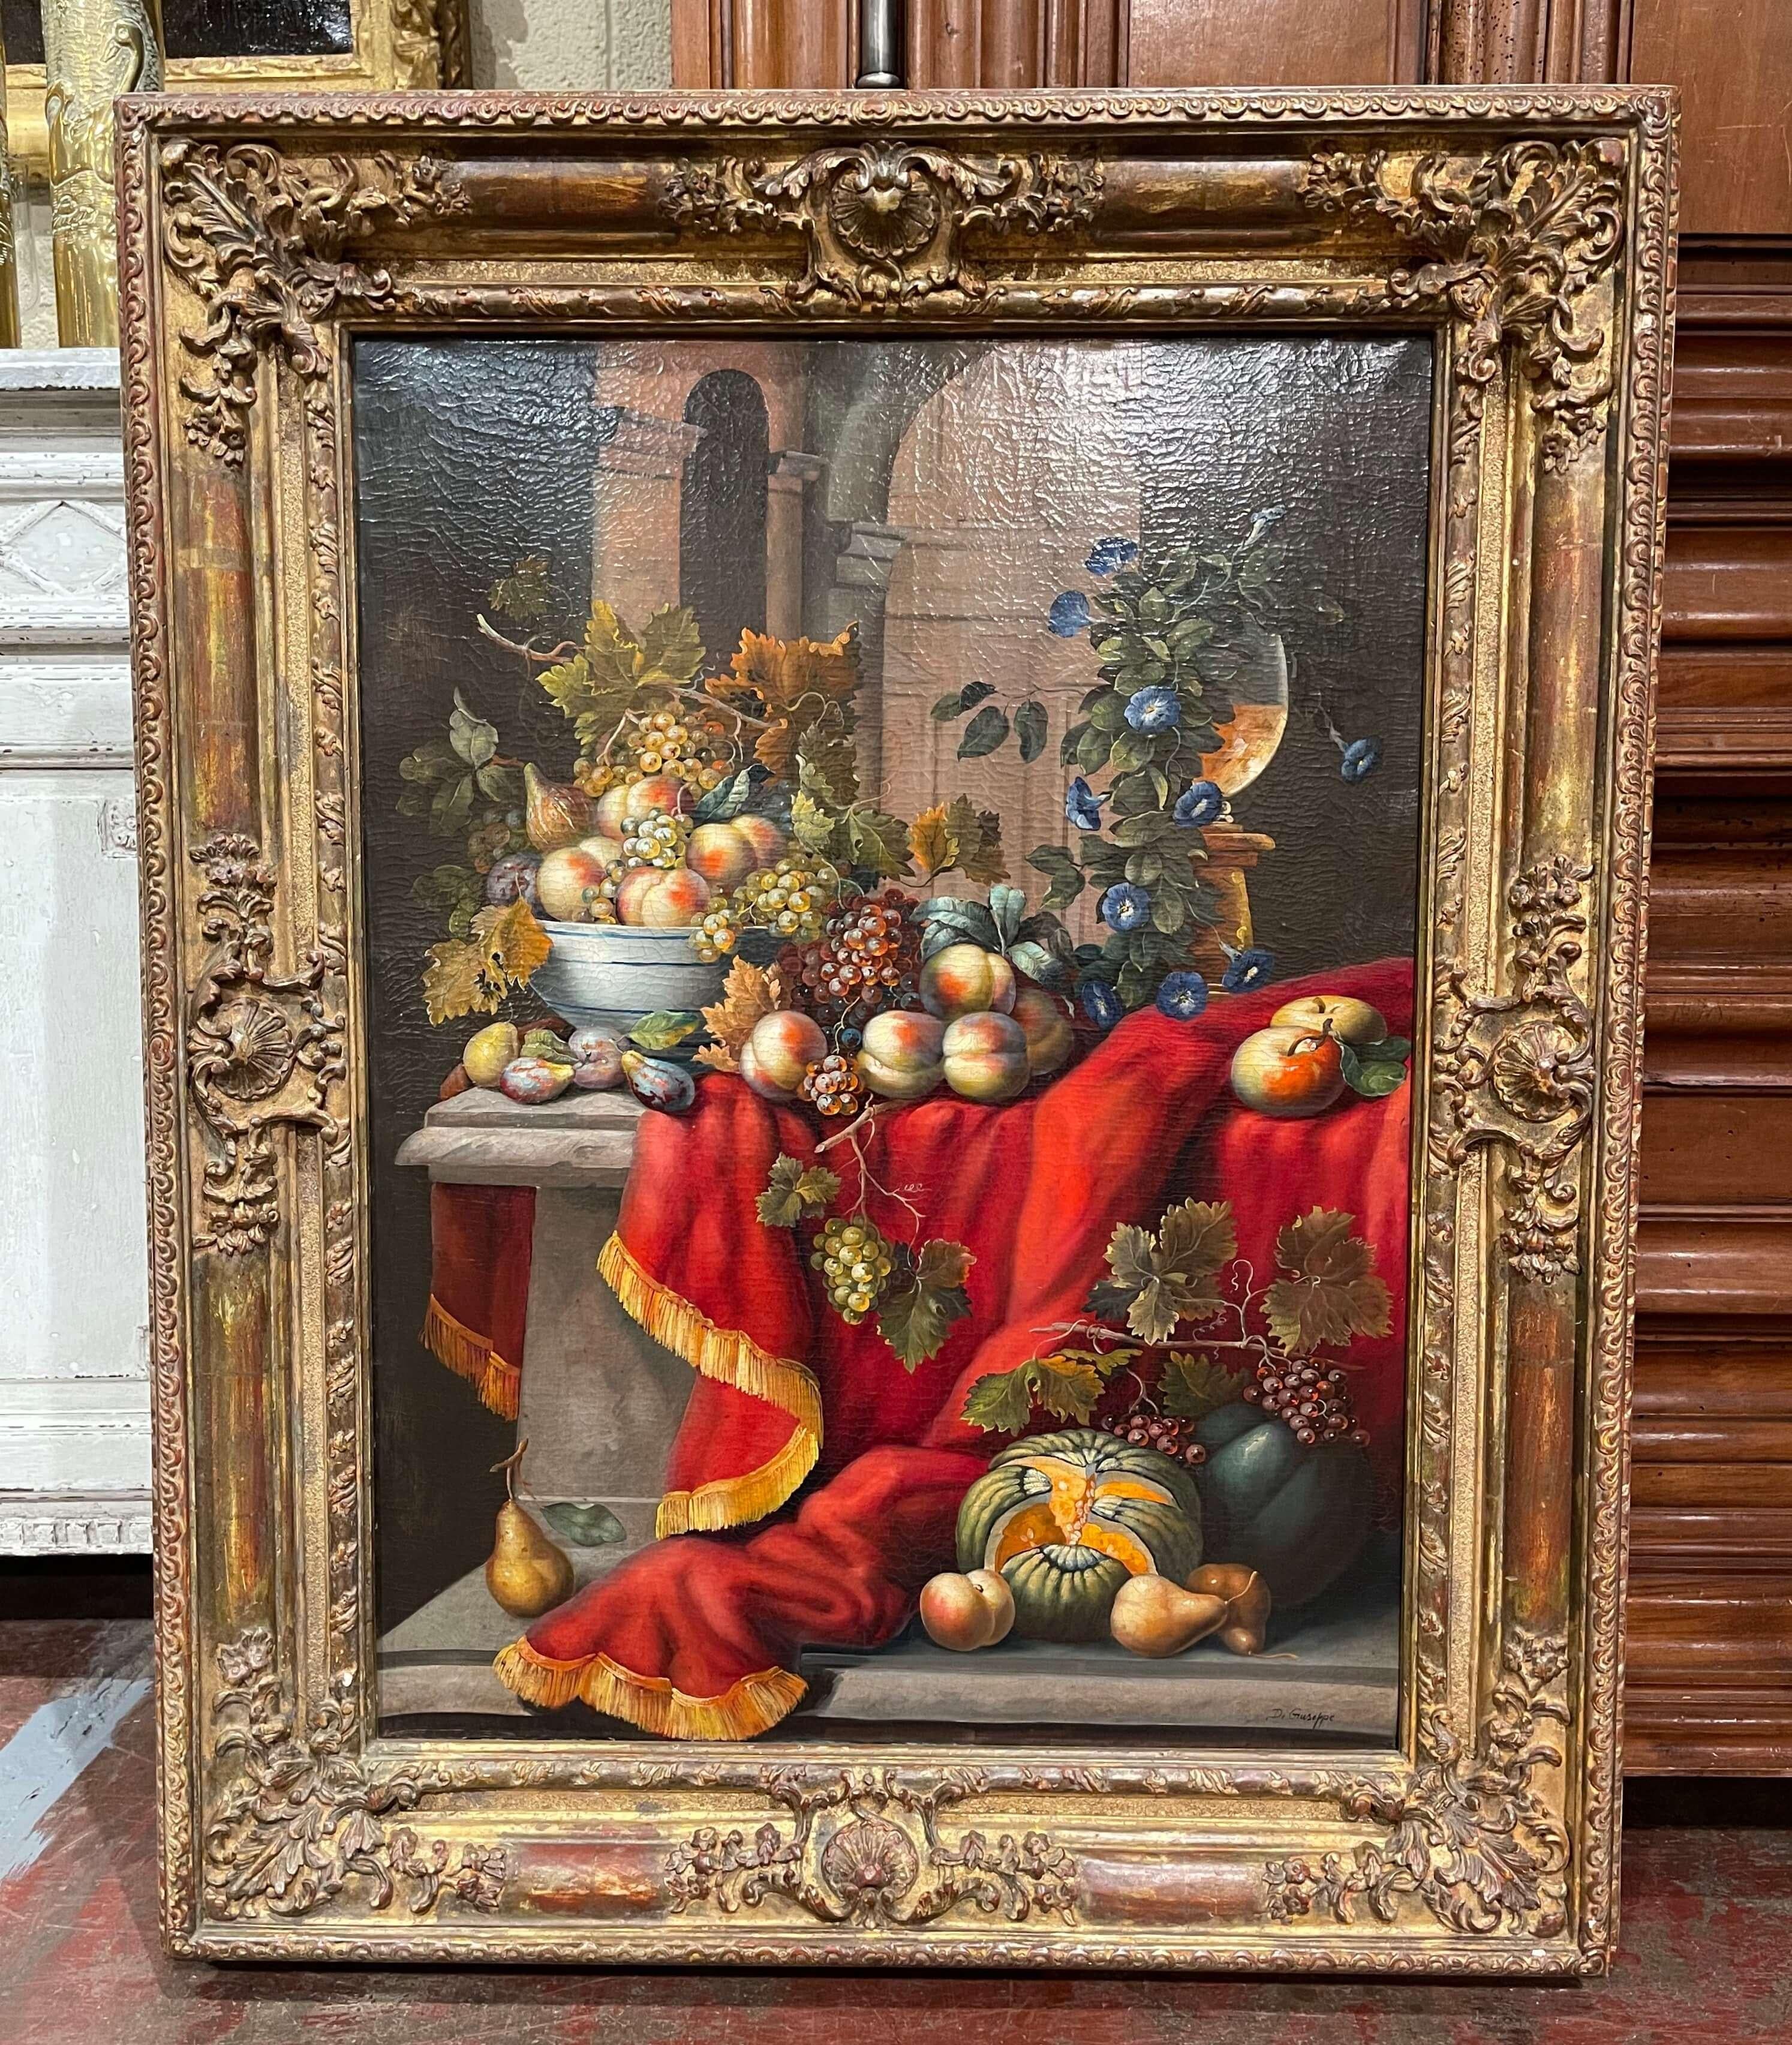 19th Century French Still Life Oil Painting in Gilt Frame Signed D. Giuseppe In Excellent Condition For Sale In Dallas, TX